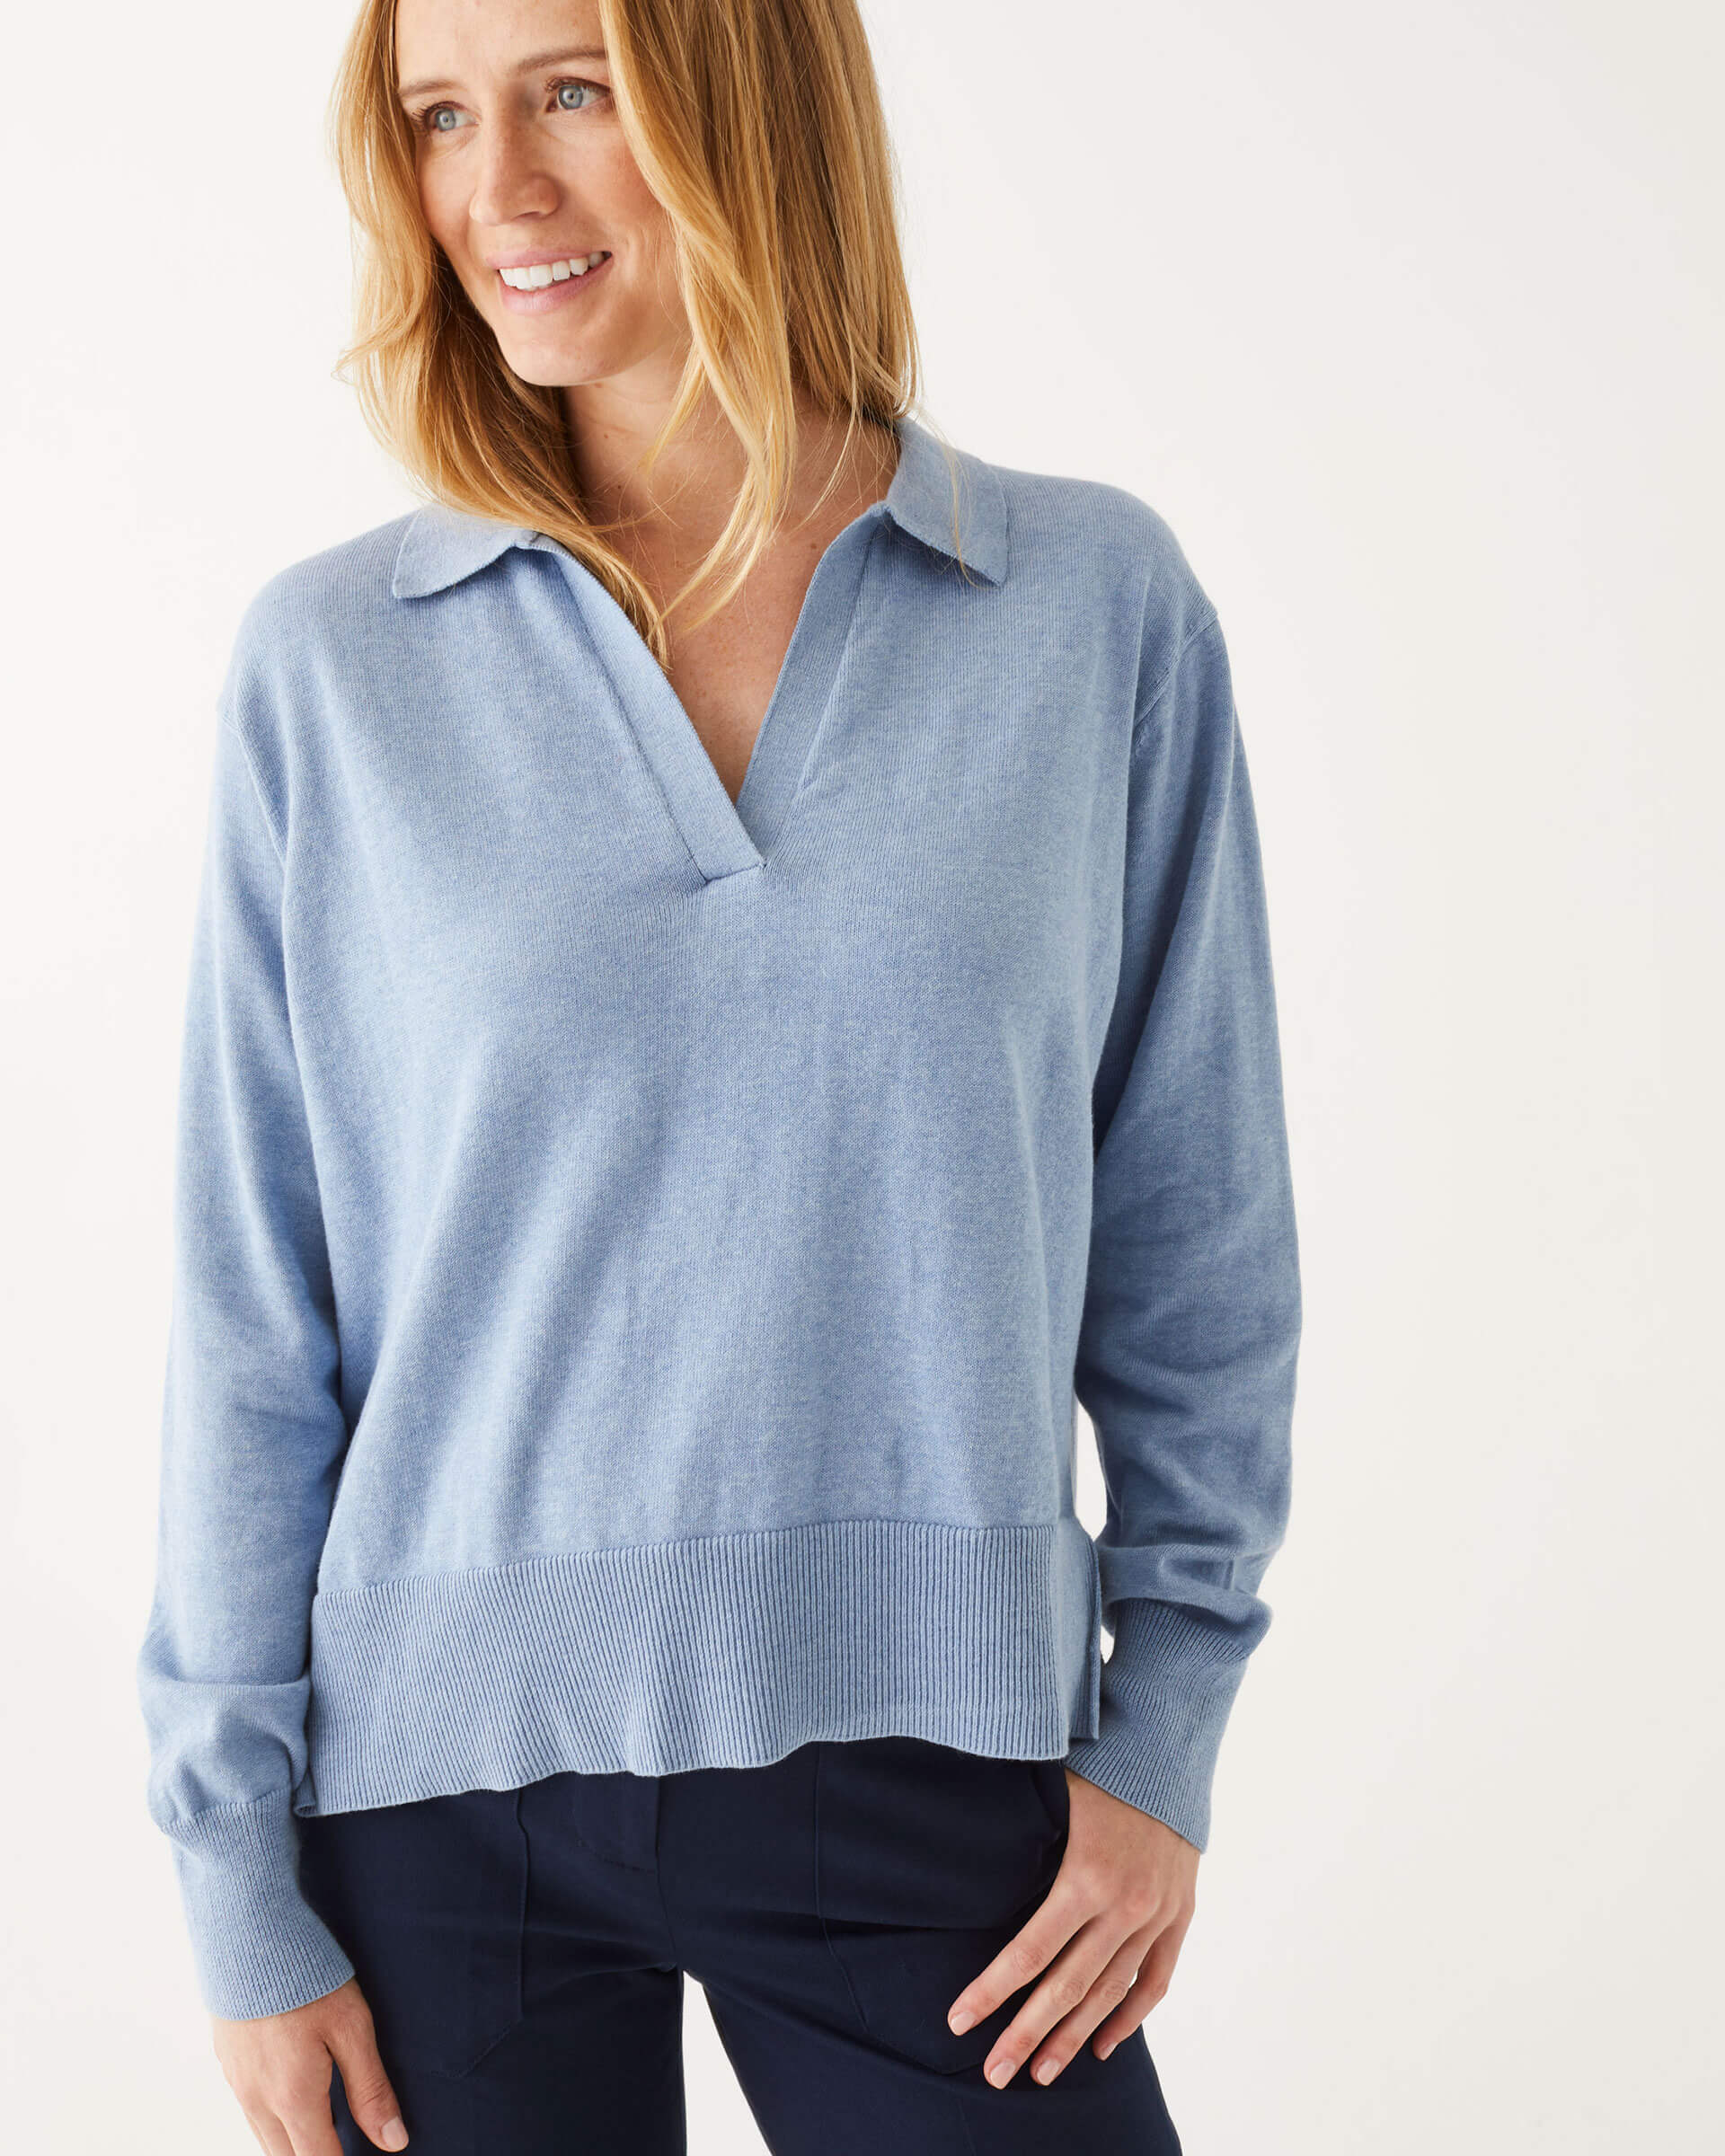 close up of female wearing light blue collared v-neck sweater in front of a white background